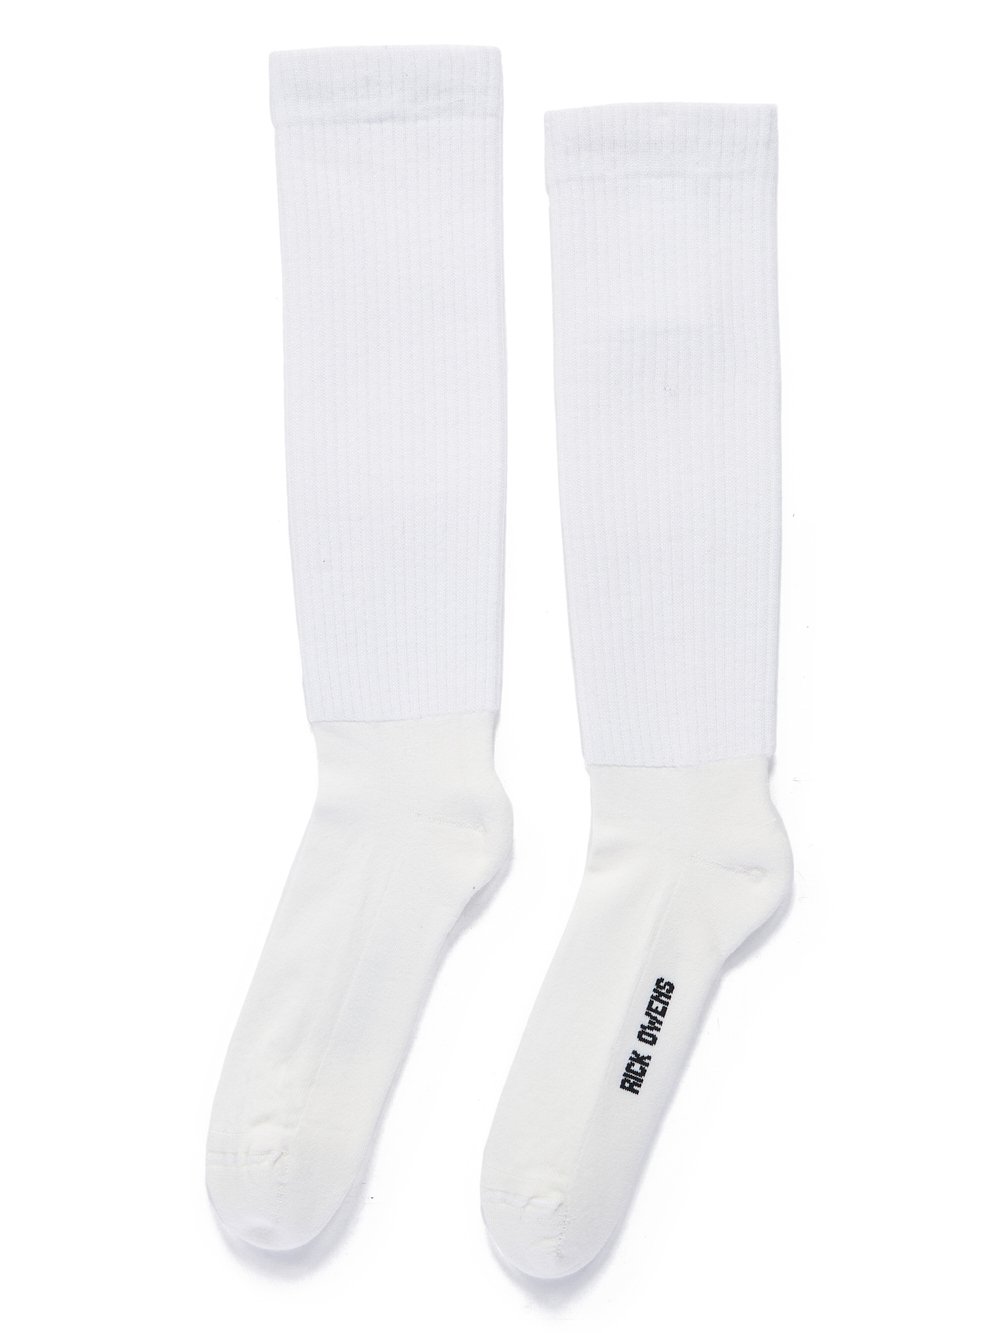 RICK OWENS FW23 LUXOR MID CALF SOCKS IN MILK AND BLACK COTTON KNIT